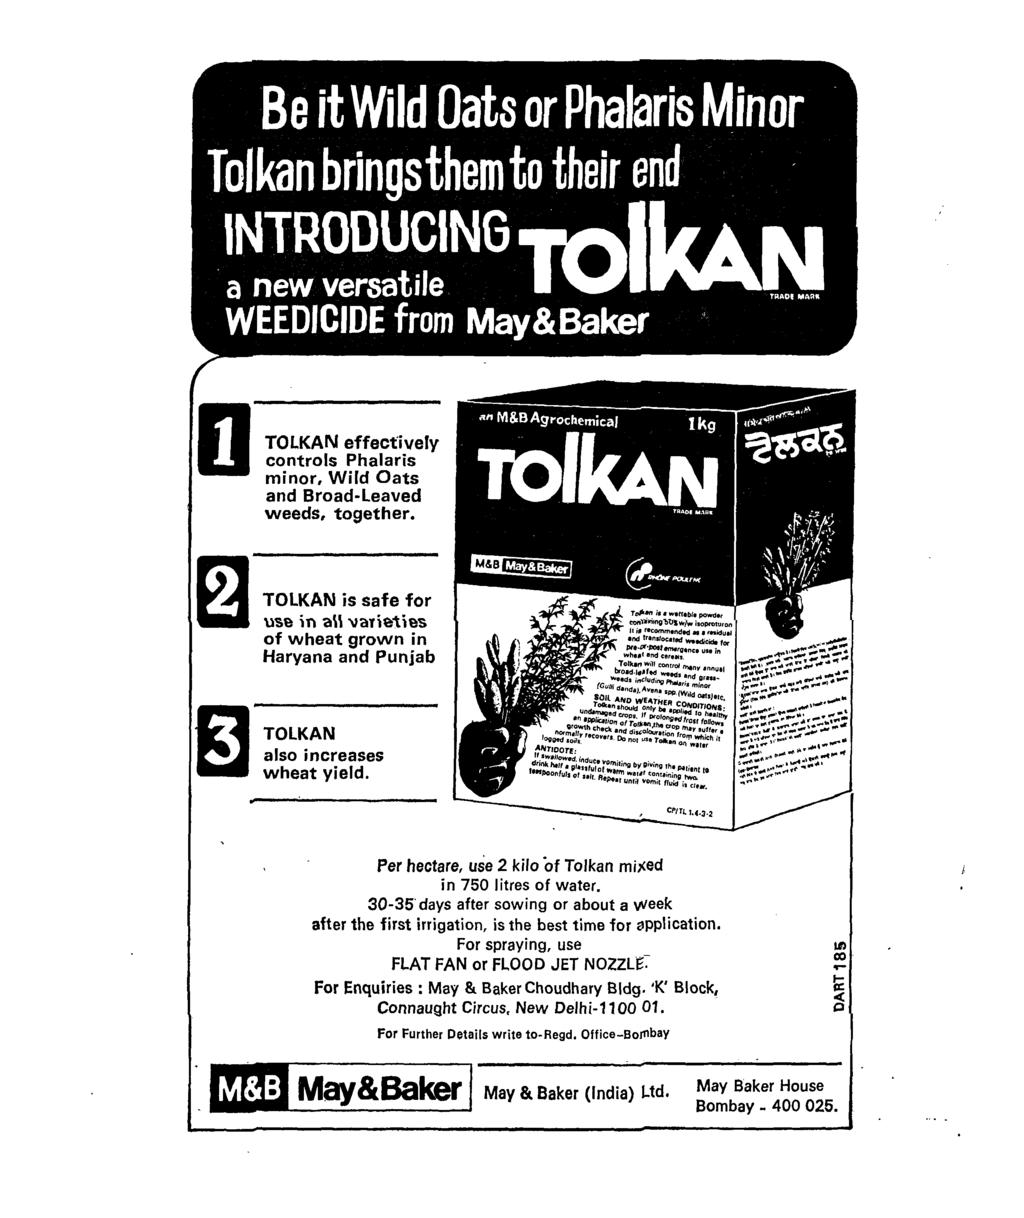 o TOLKAN effectively controls Phalaris minor, Wild Oats and Broad-Leaved weeds, together.